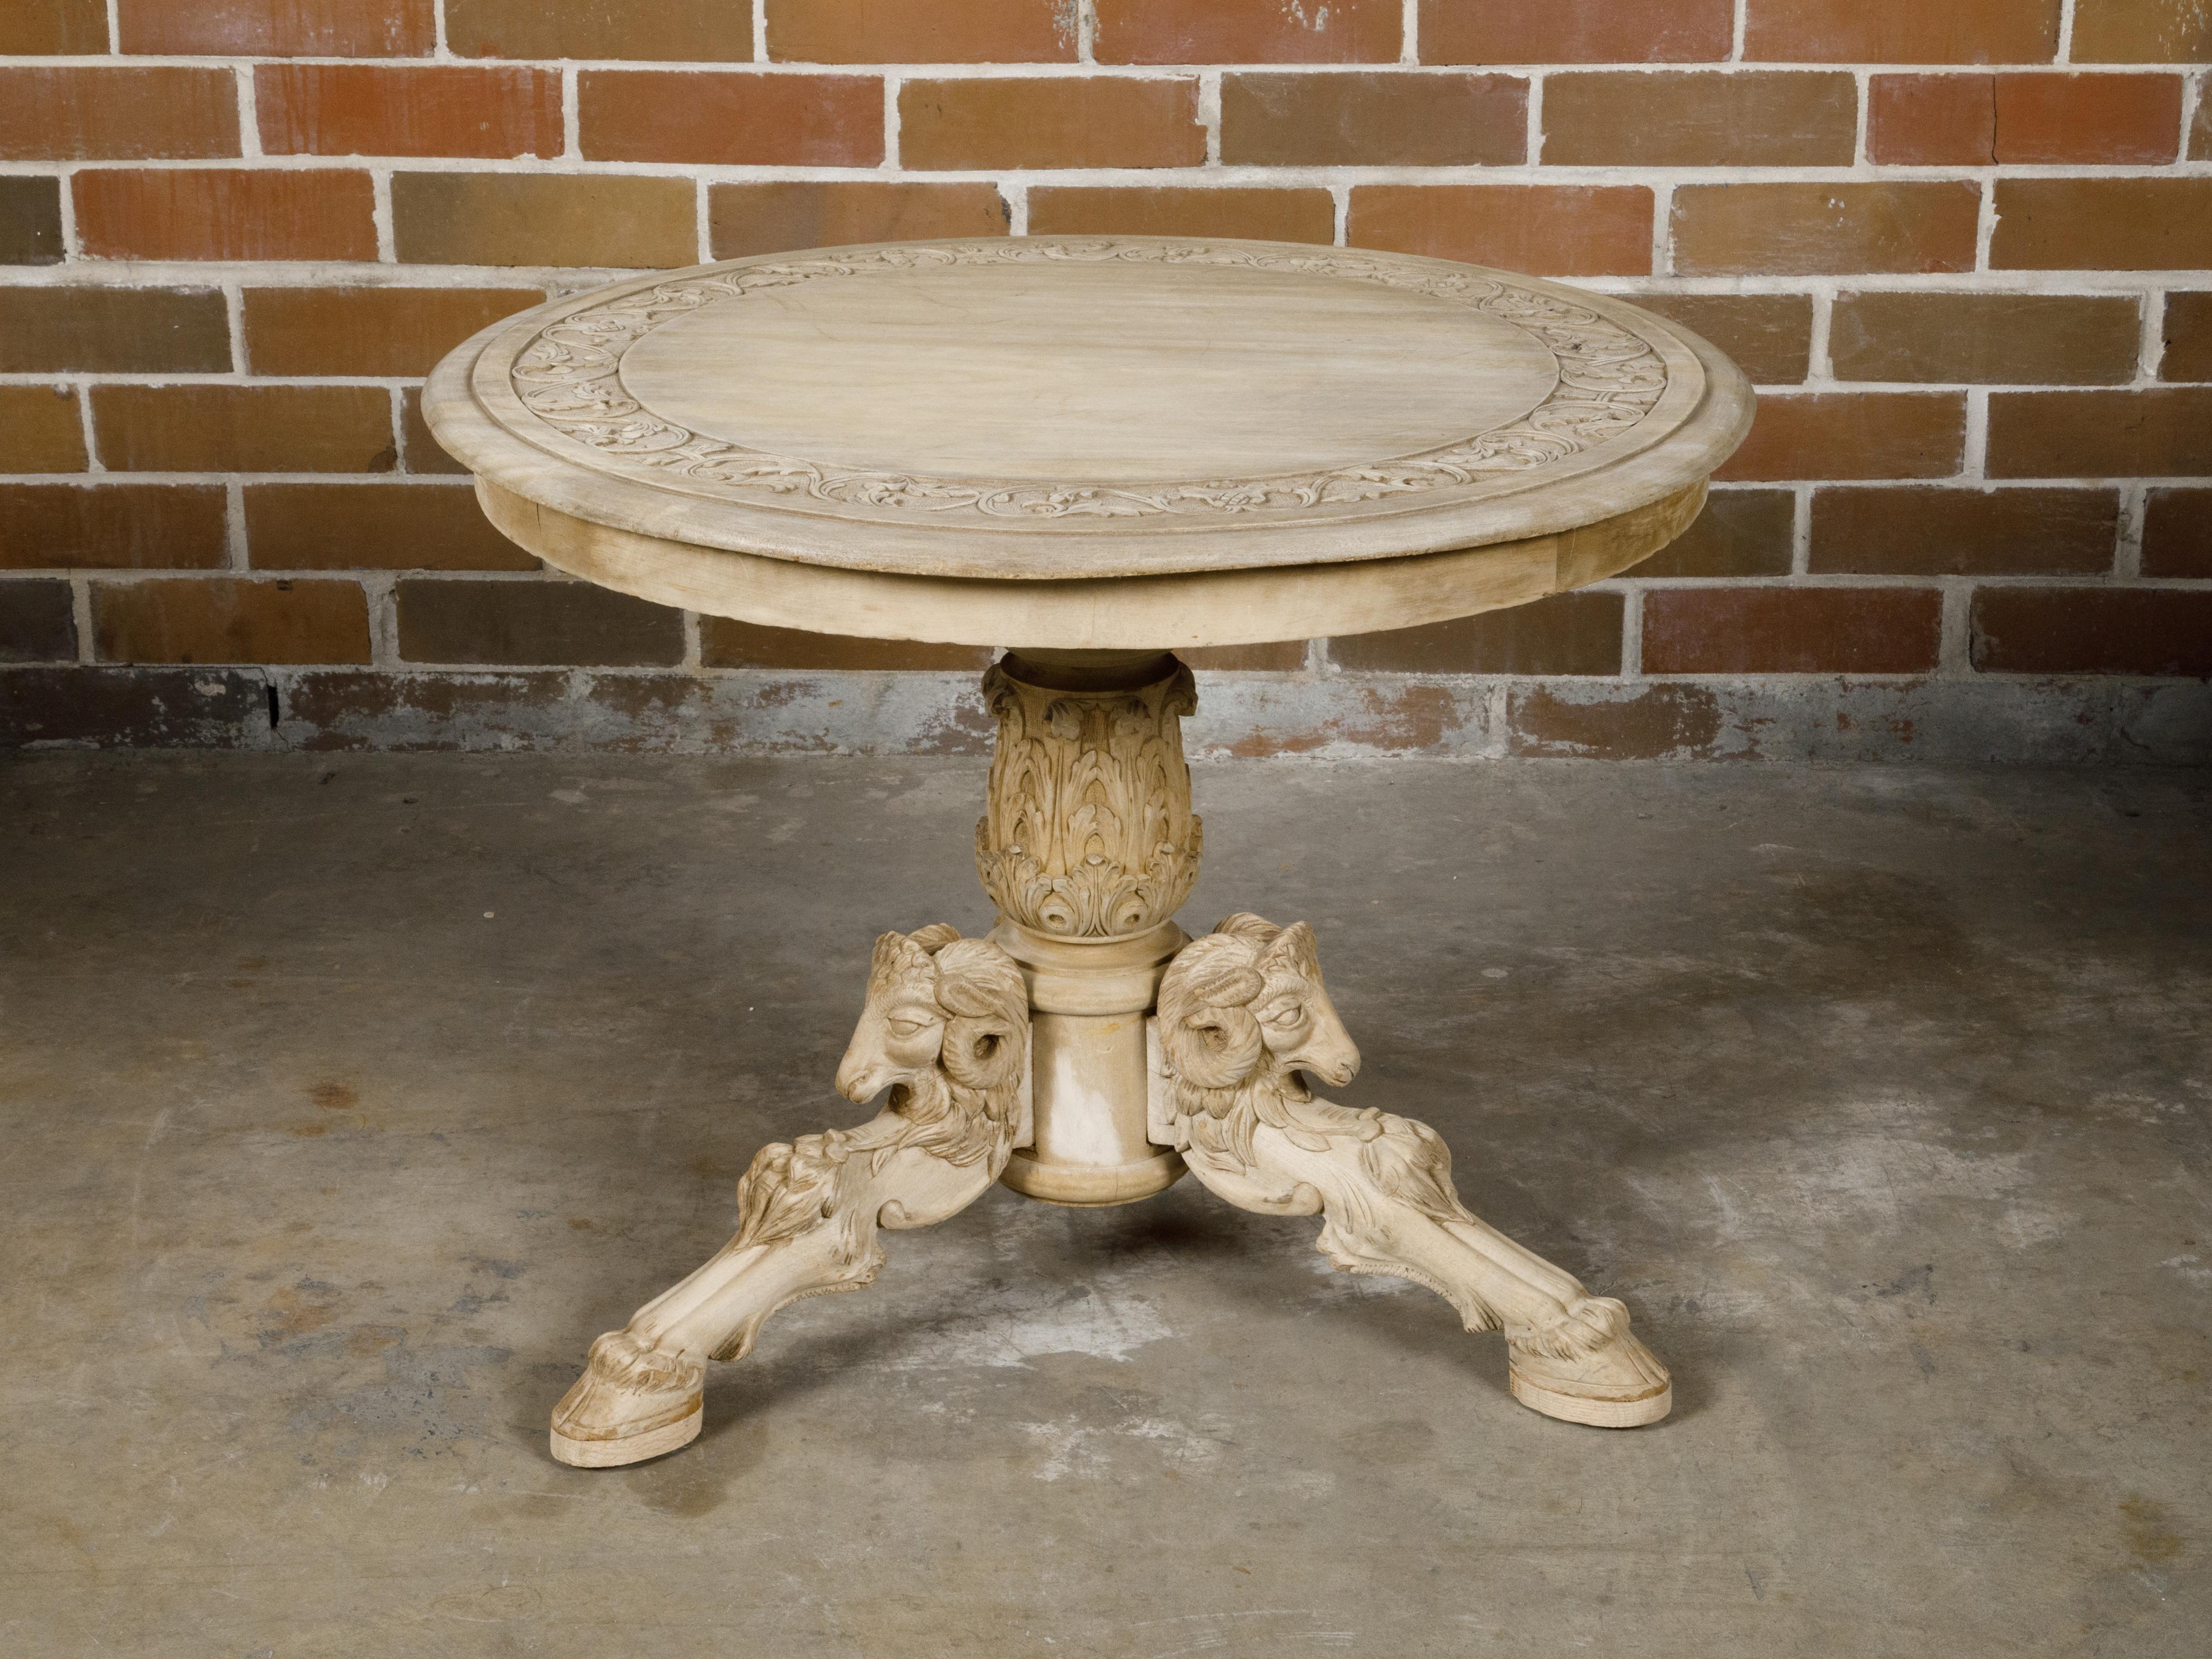 French 1900s Round Top Pedestal Table with Carved Rams' Heads and Scrollwork For Sale 5